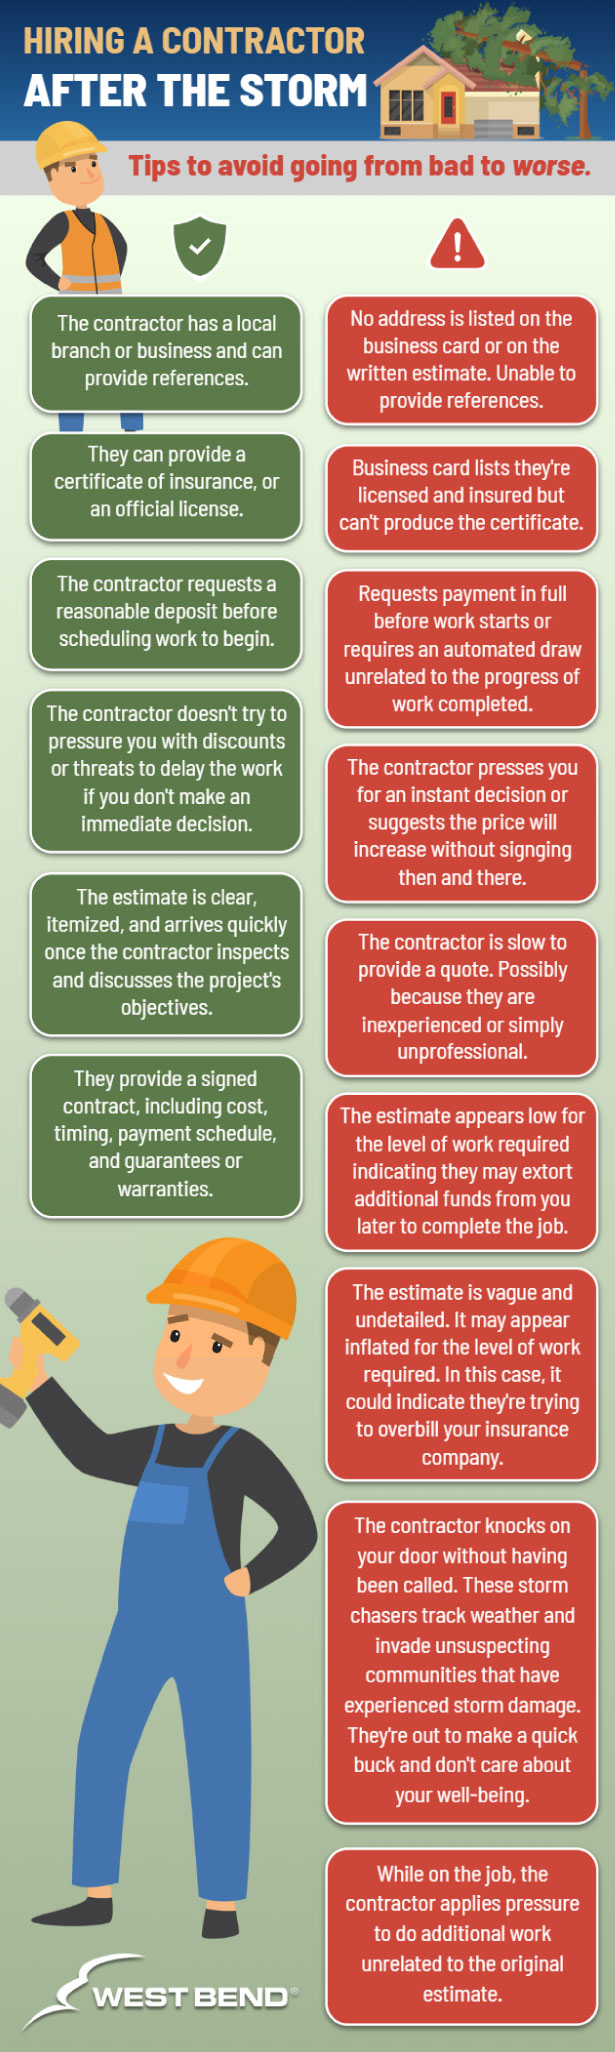 Reputable contractor guide